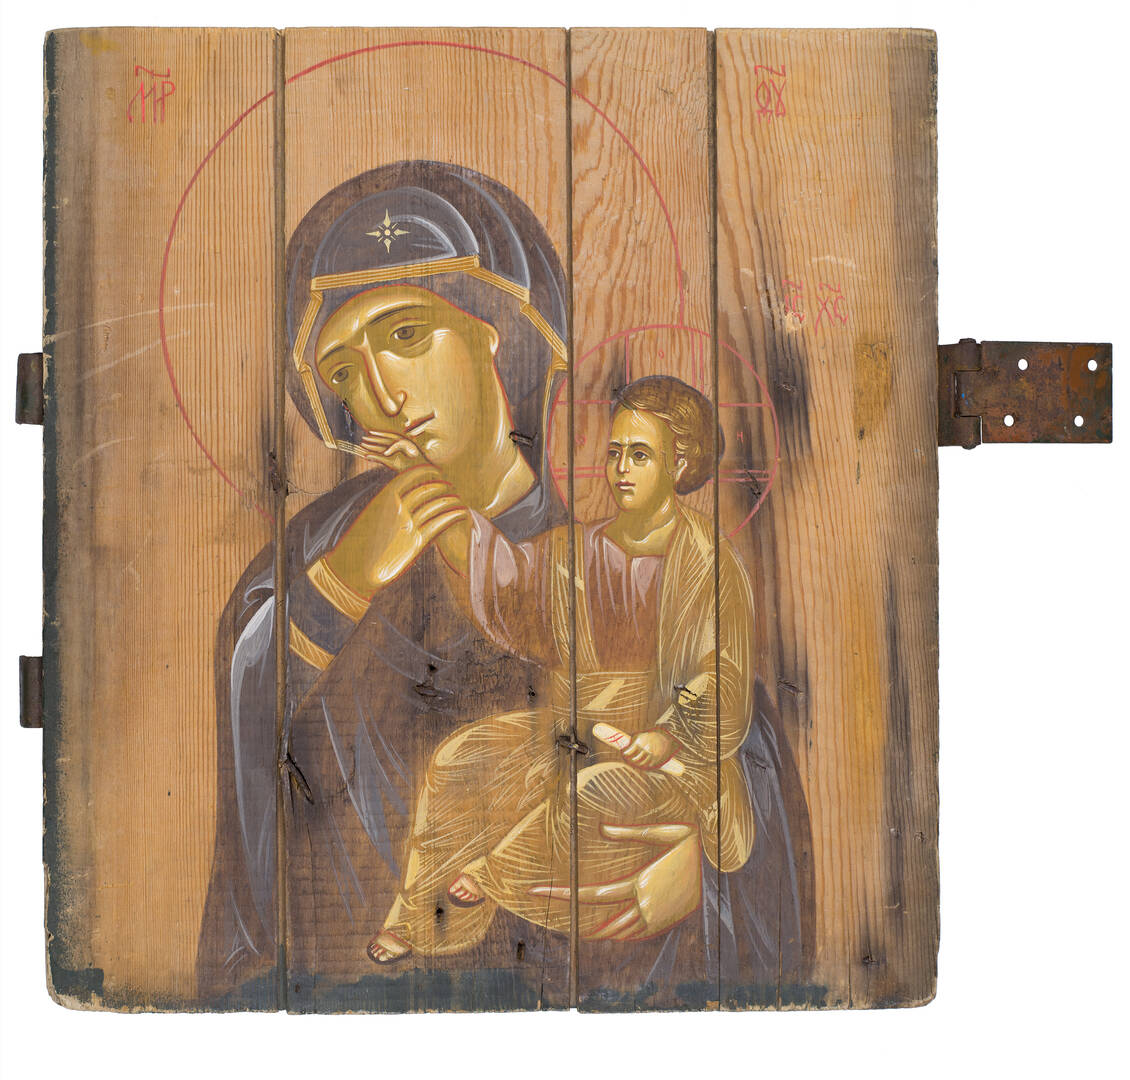 The Vatopedi 'Consolation' or 'Comfort' Icon of the Mother of God